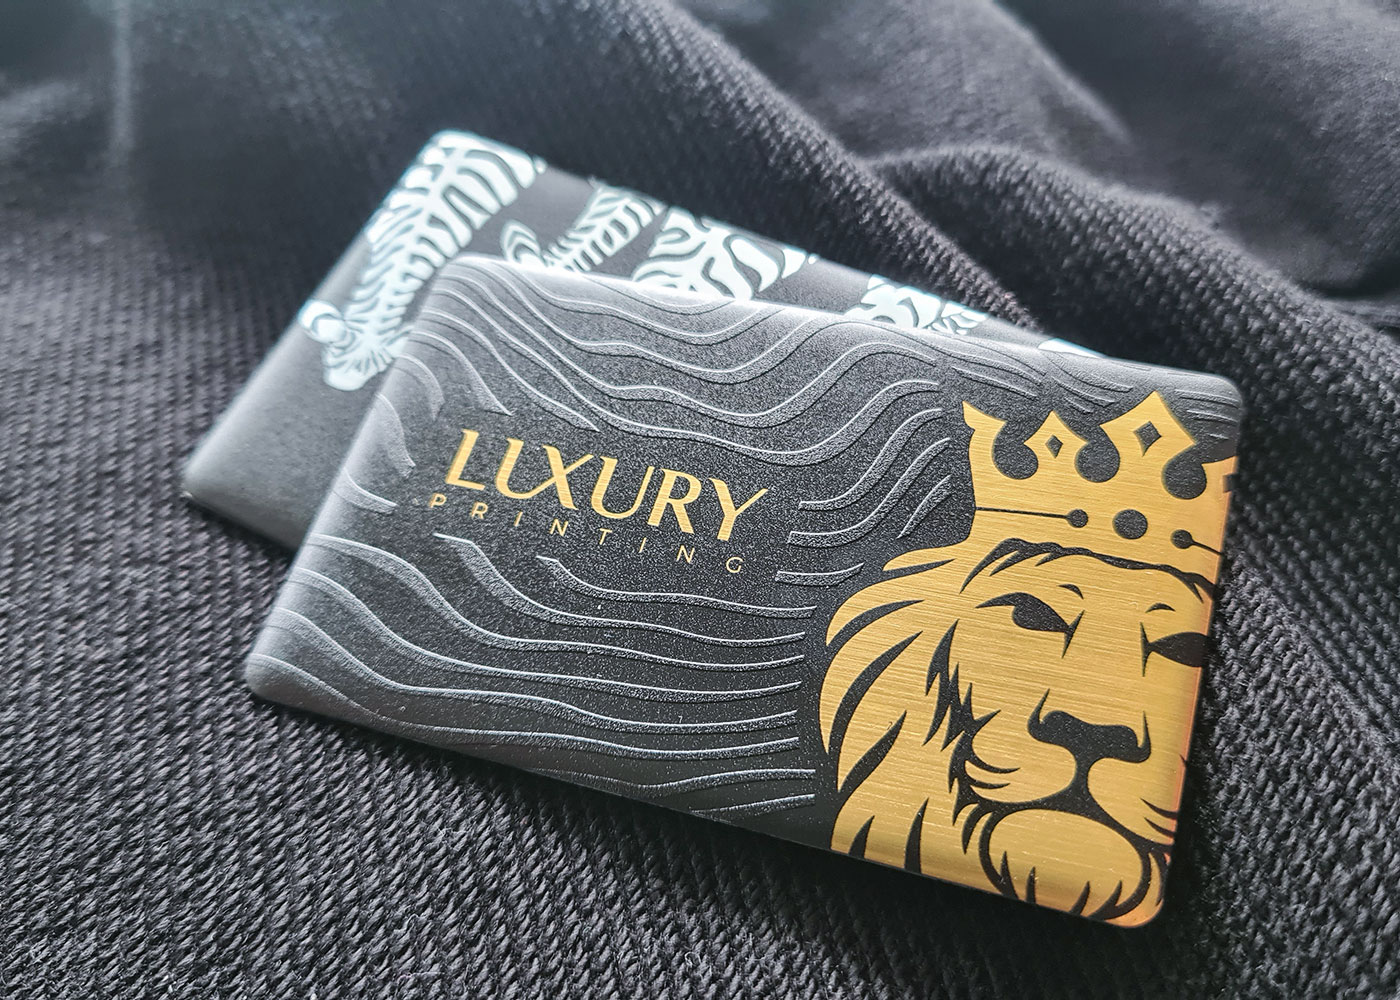 Luxury Business Cards 29